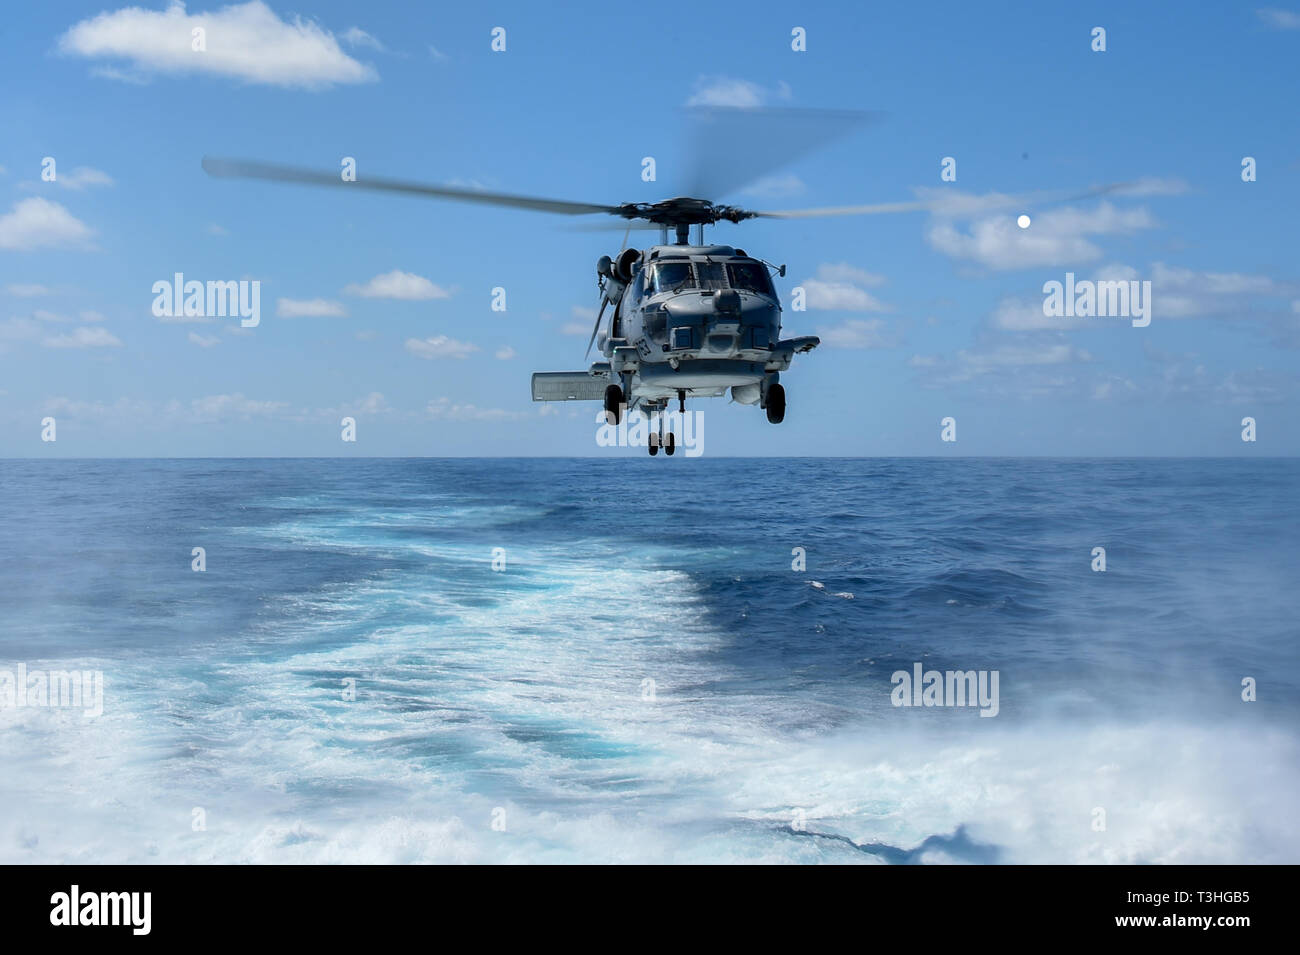 190408-N-UM706-0407 ATLANTIC OCEAN (April 8, 2019) An MH-60R Sea Hawk Helicopter assigned to the “Grandmasters” of Helicopter Maritime Strike Squadron (HSM) 46 takes off of the flight deck aboard the Arleigh Burke-class guided-missile destroyer USS Nitze (DDG 94). Nitze is underway as part of Abraham Lincoln Carrier Strike Group (ABECSG) deployment in support of maritime security cooperation efforts in the U.S. 5th, 6th and 7th Fleet areas of responsibility. With Abraham Lincoln as the flagship, deployed strike group assets include staffs, ships and aircraft of Carrier Strike Group 12 (CSG 12) Stock Photo